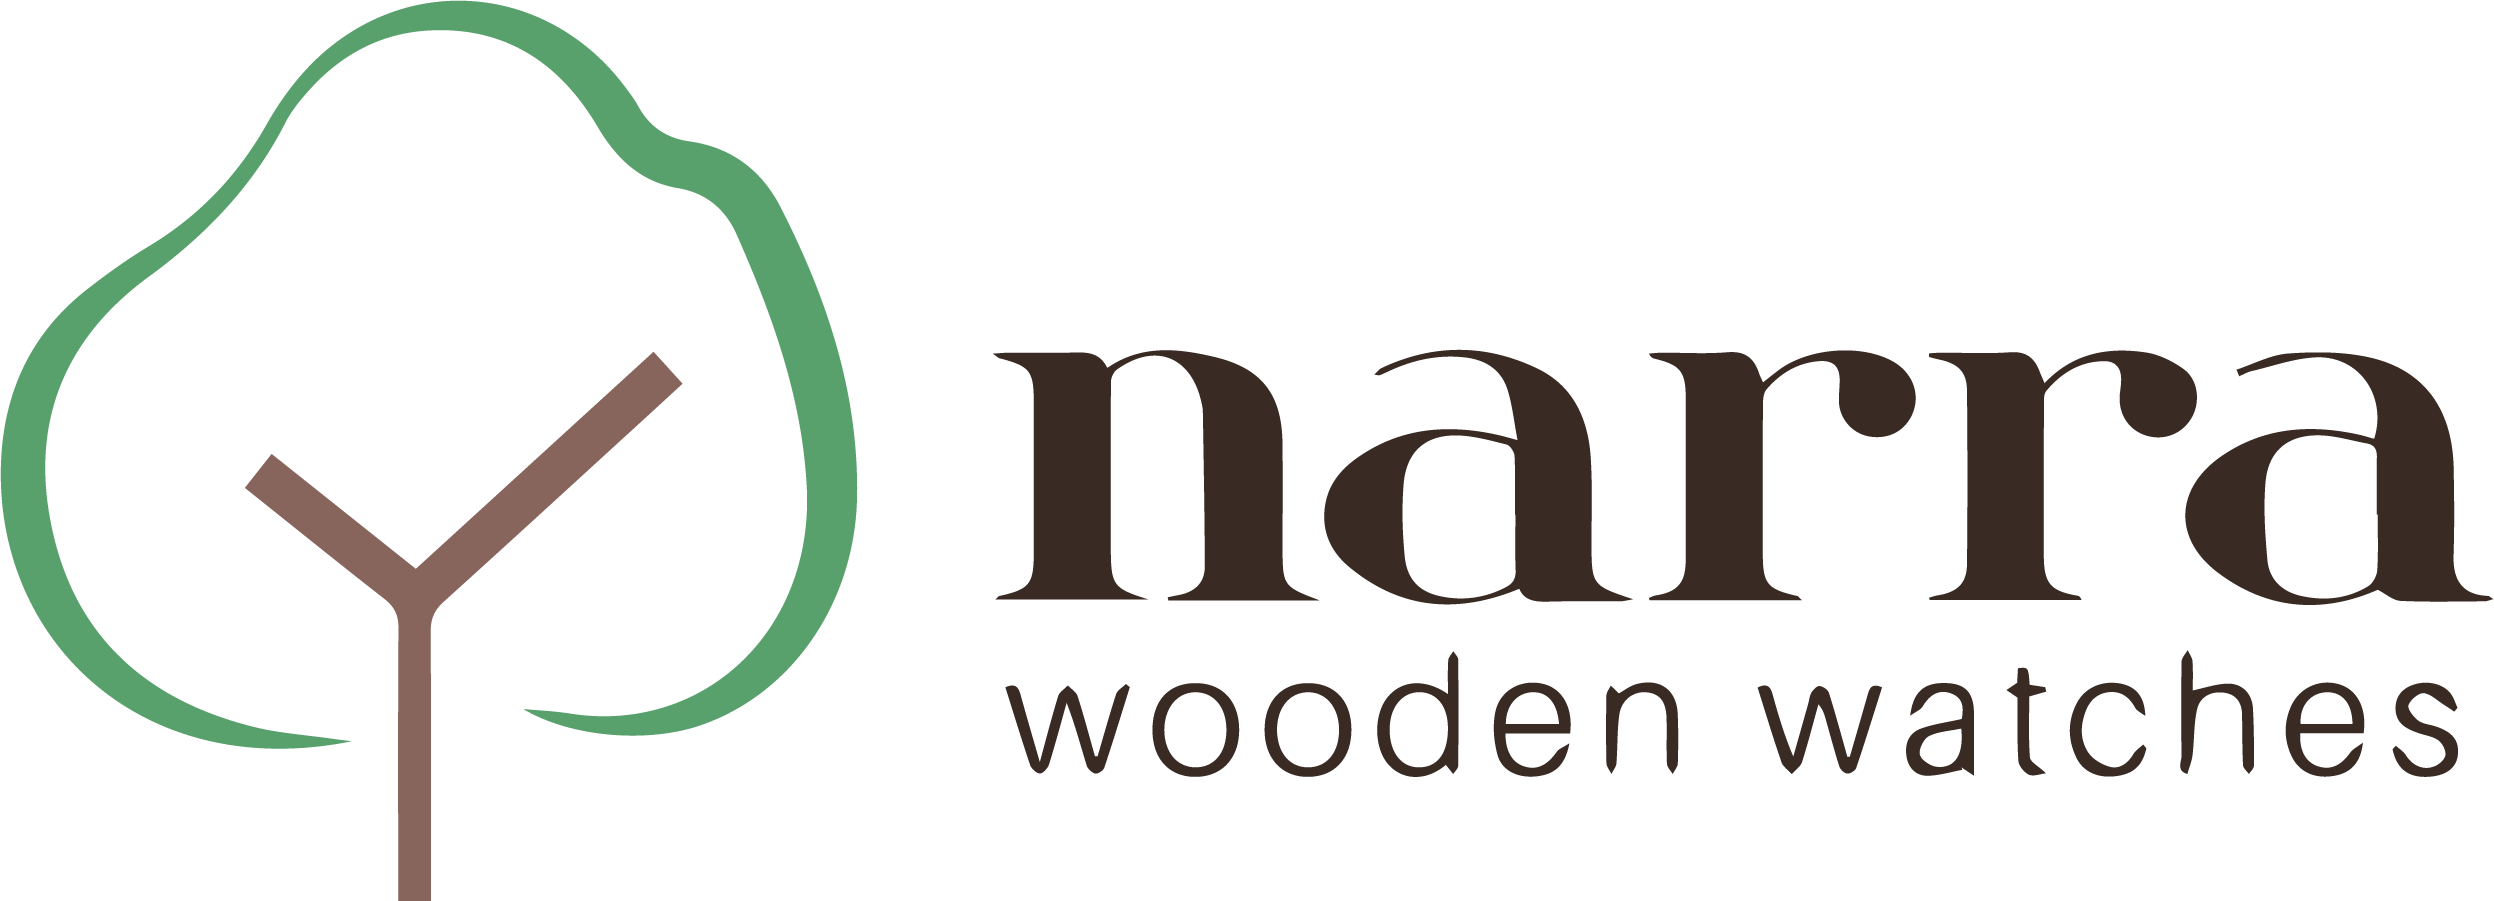 Watches Logo - Wooden watches by Narra Watches | Watches made from nature | Narra ...